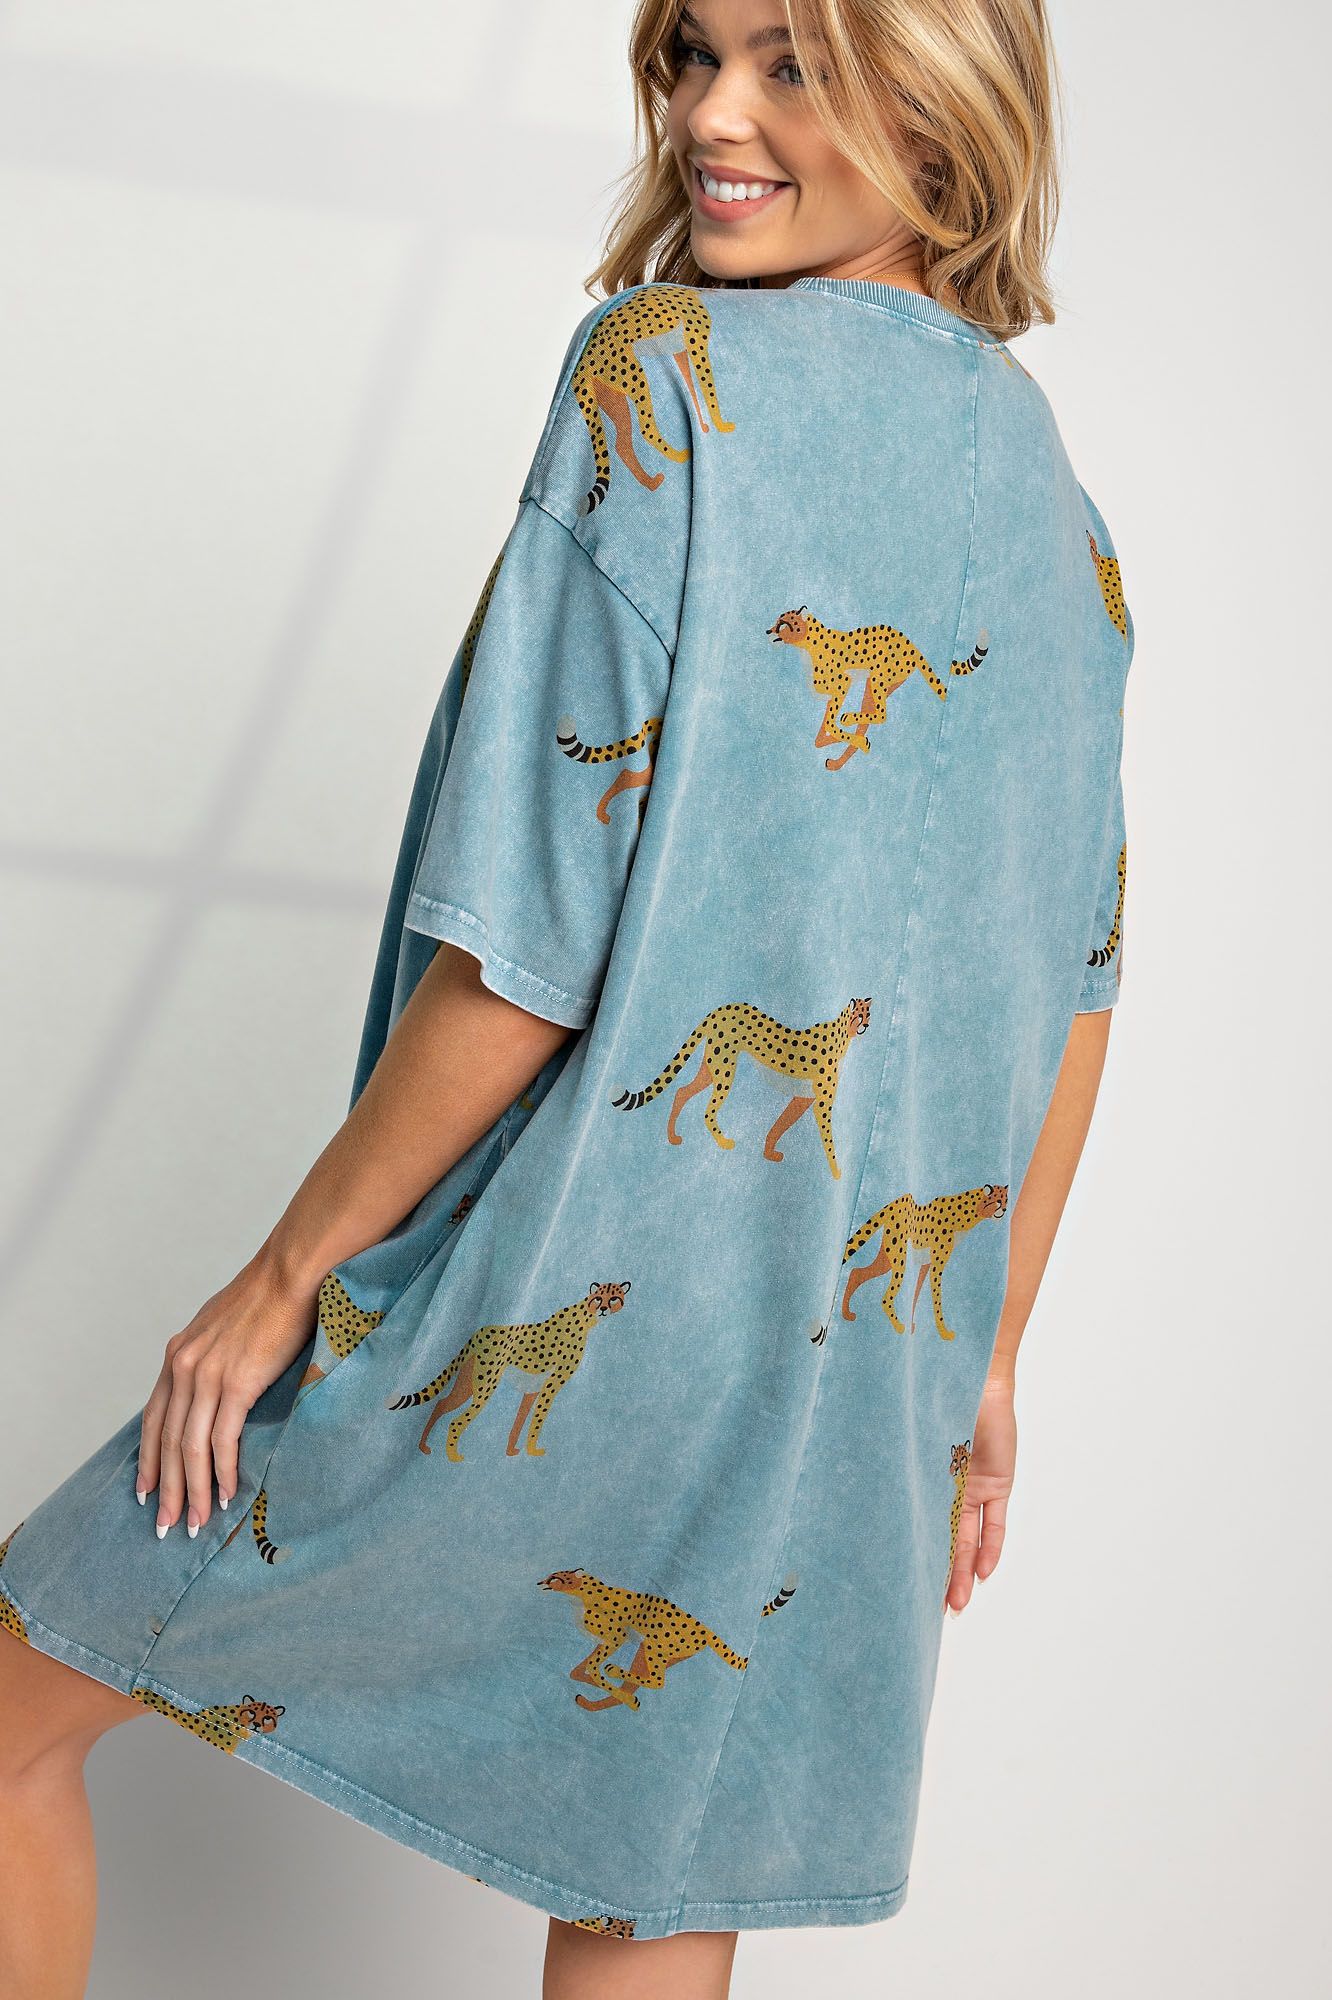 In the Wild Mineral Washed Cheetah Print T Shirt Dress in Washed Denim